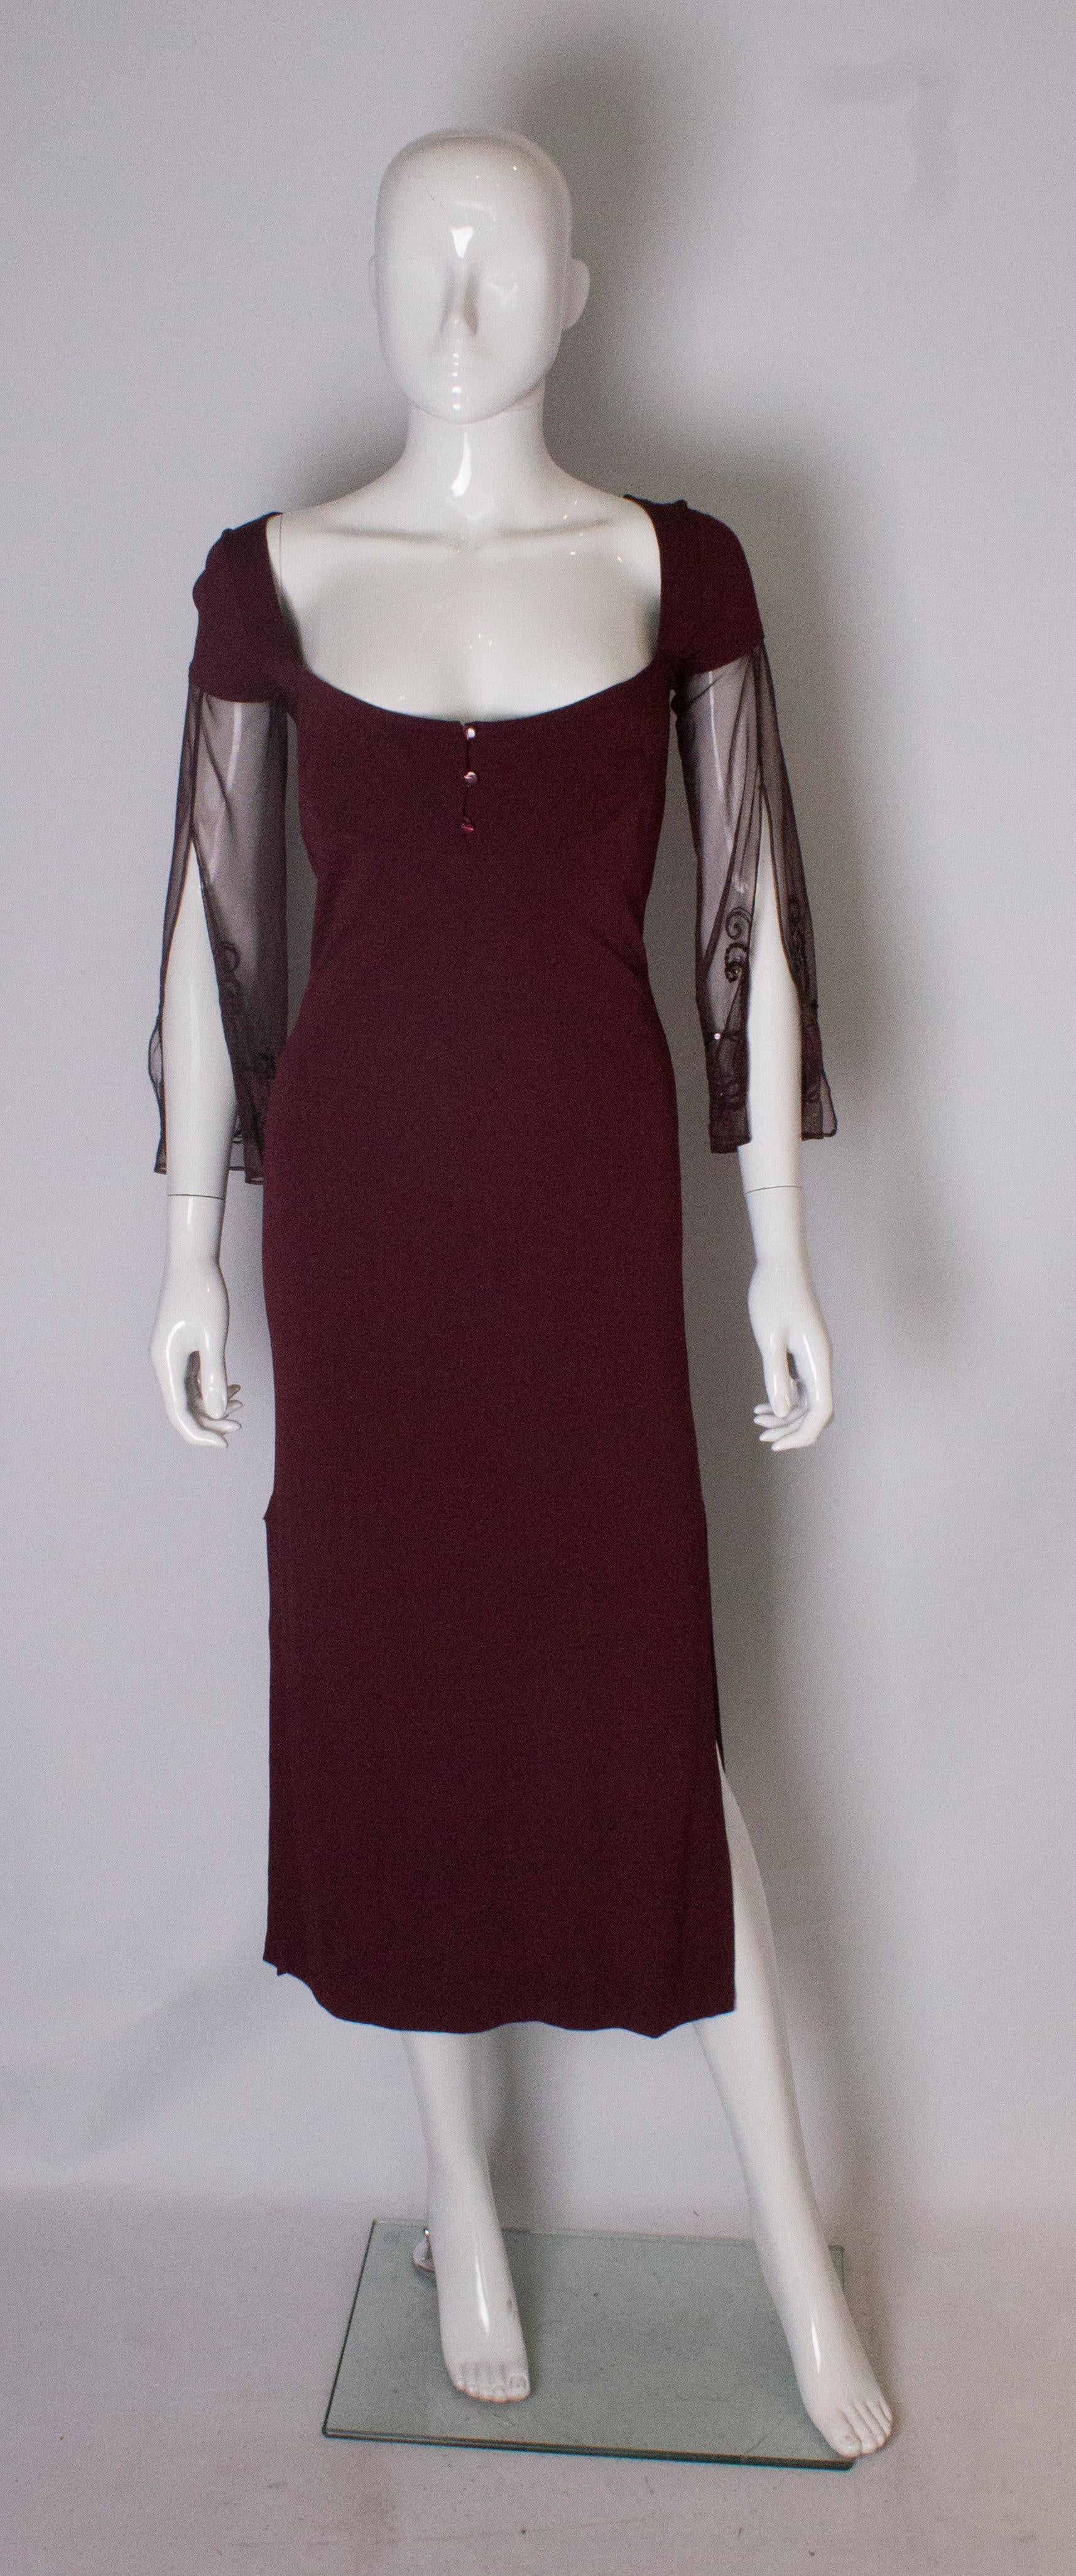 A chic dress by Obzek. The dress has a scoop neckline with three button detail, cap sleaves in fabric and then embellished net on the remaining part. The dress has  a 16' slit on either side.